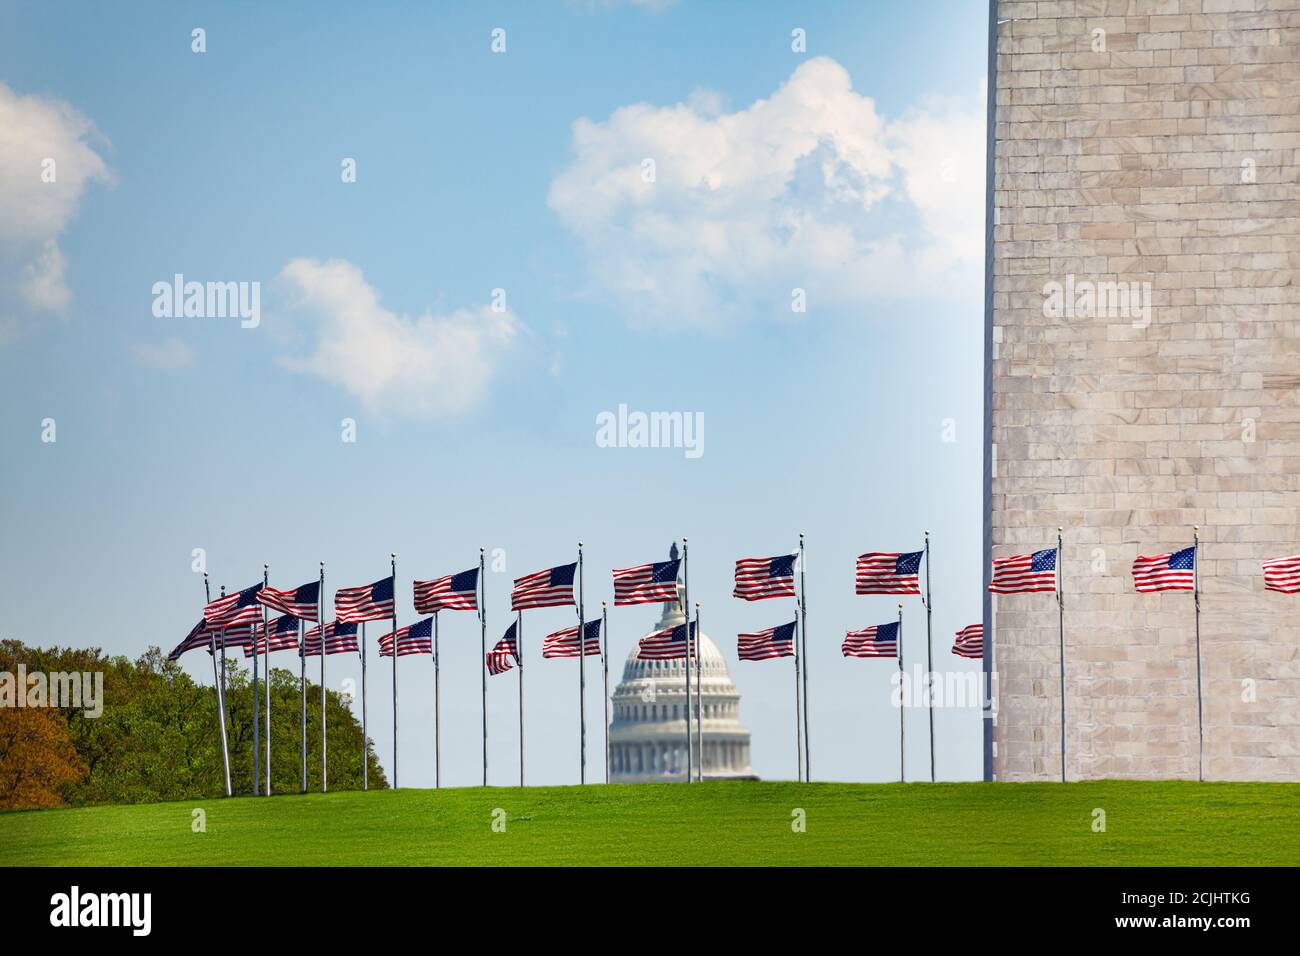 Washington memorial obelisk column with many flags over US Capitol building, DC, USA Stock Photo